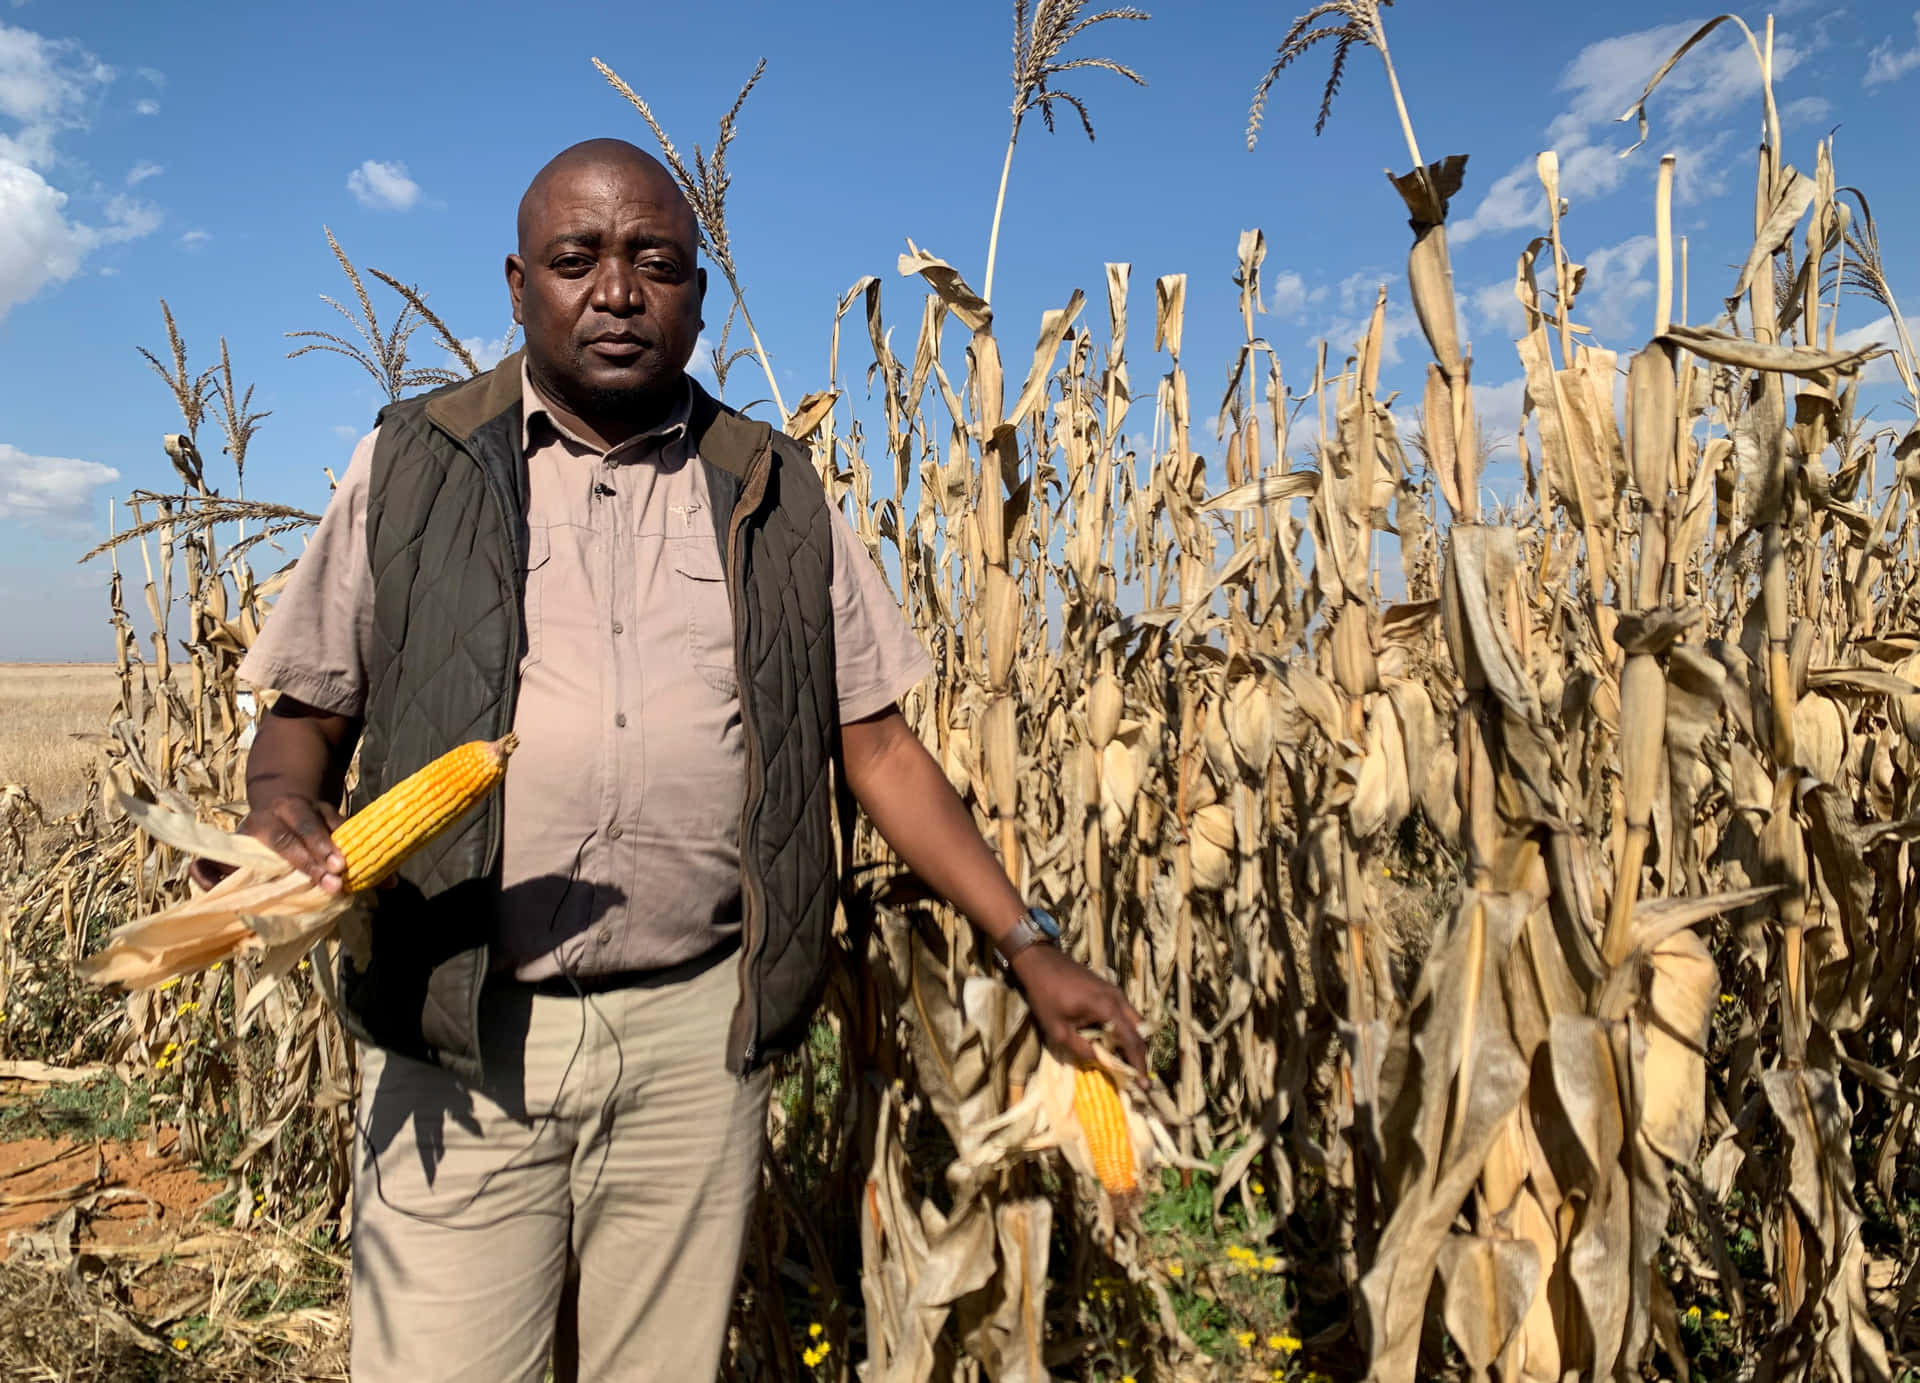 A Man Standing In A Corn Field With Corn